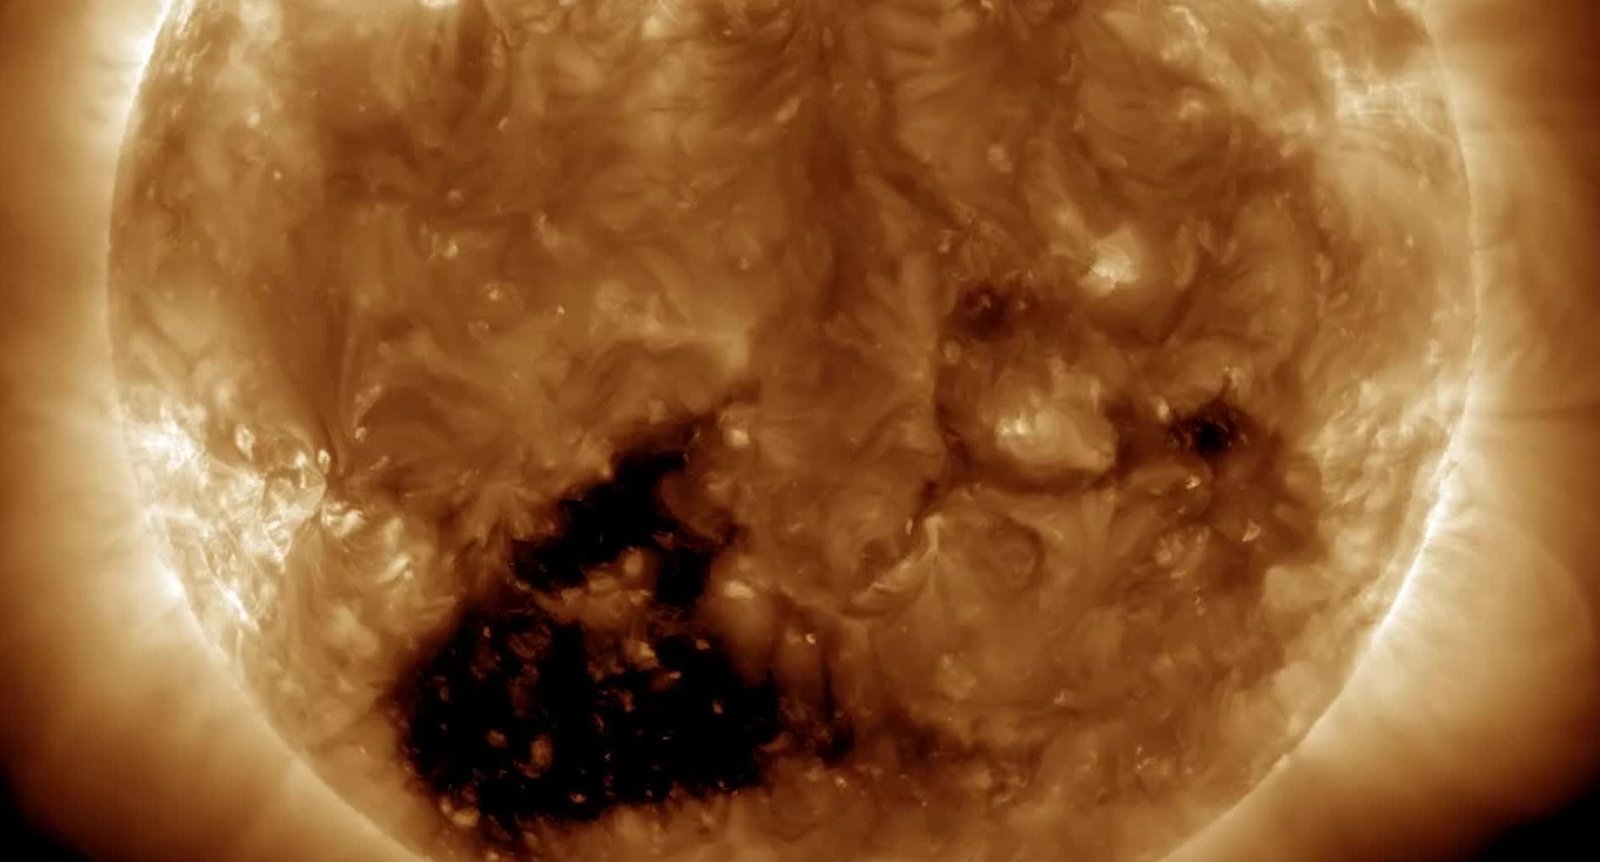 A giant coronal hole in the Sun could fit 60 Earths is now exploding